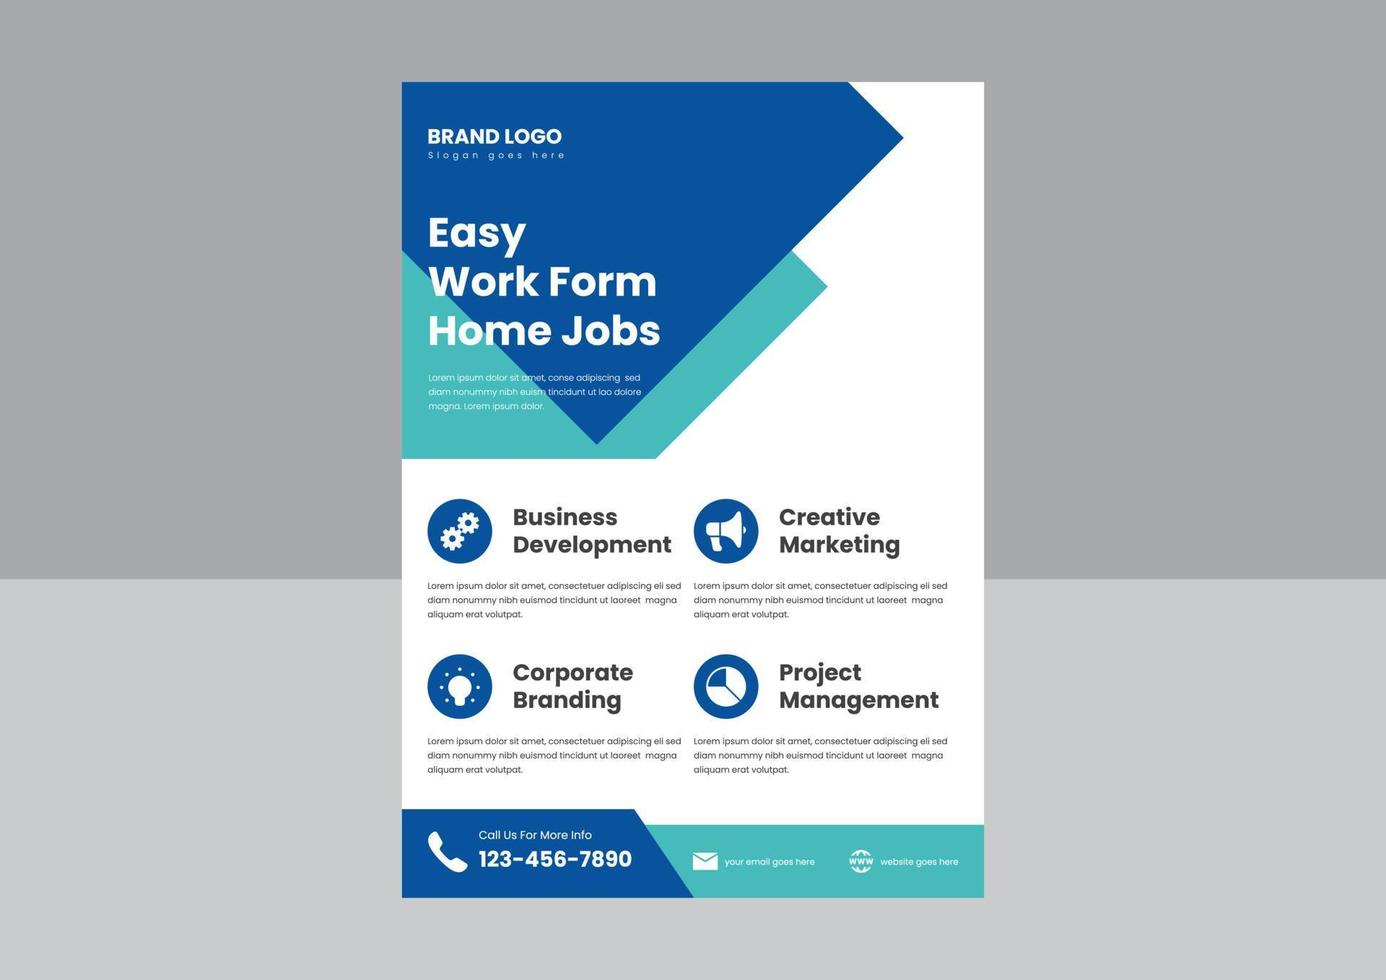 stay safe work from home flyer poster design. work from home jobs opportunity poster leaflet design. easy work from home jobs flyer design. vector